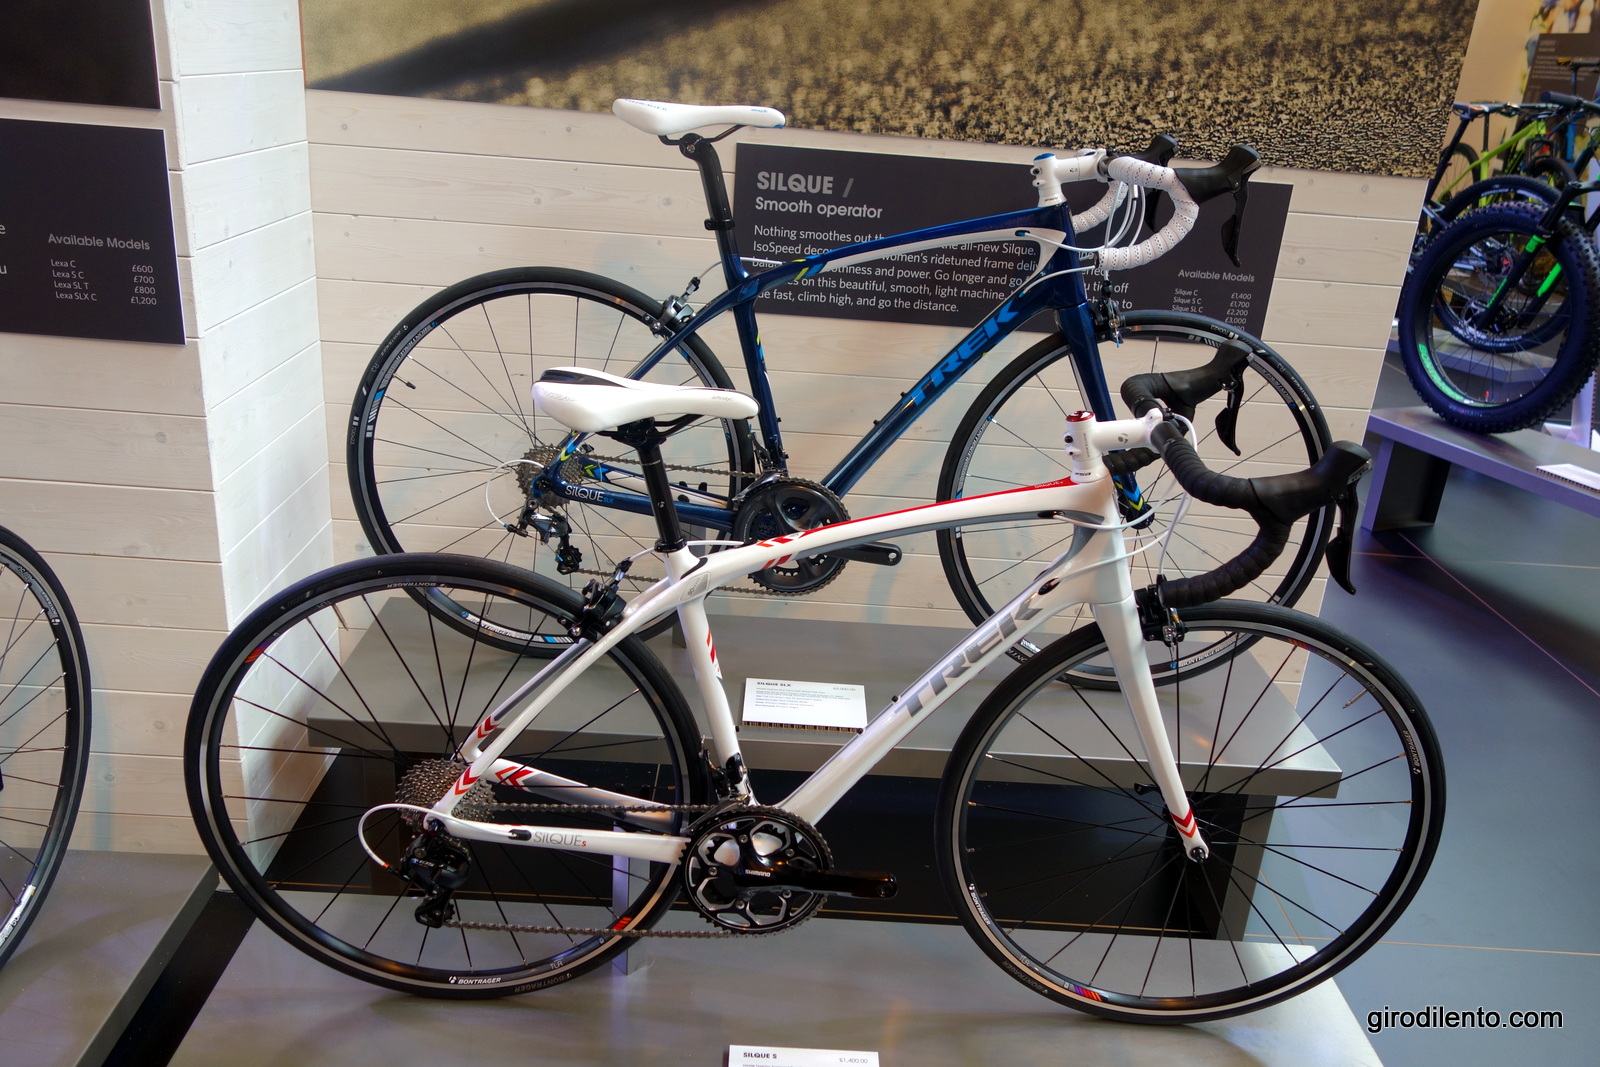 The also impressive Trek Silque range of womens bikes - packed full of clever design and performance